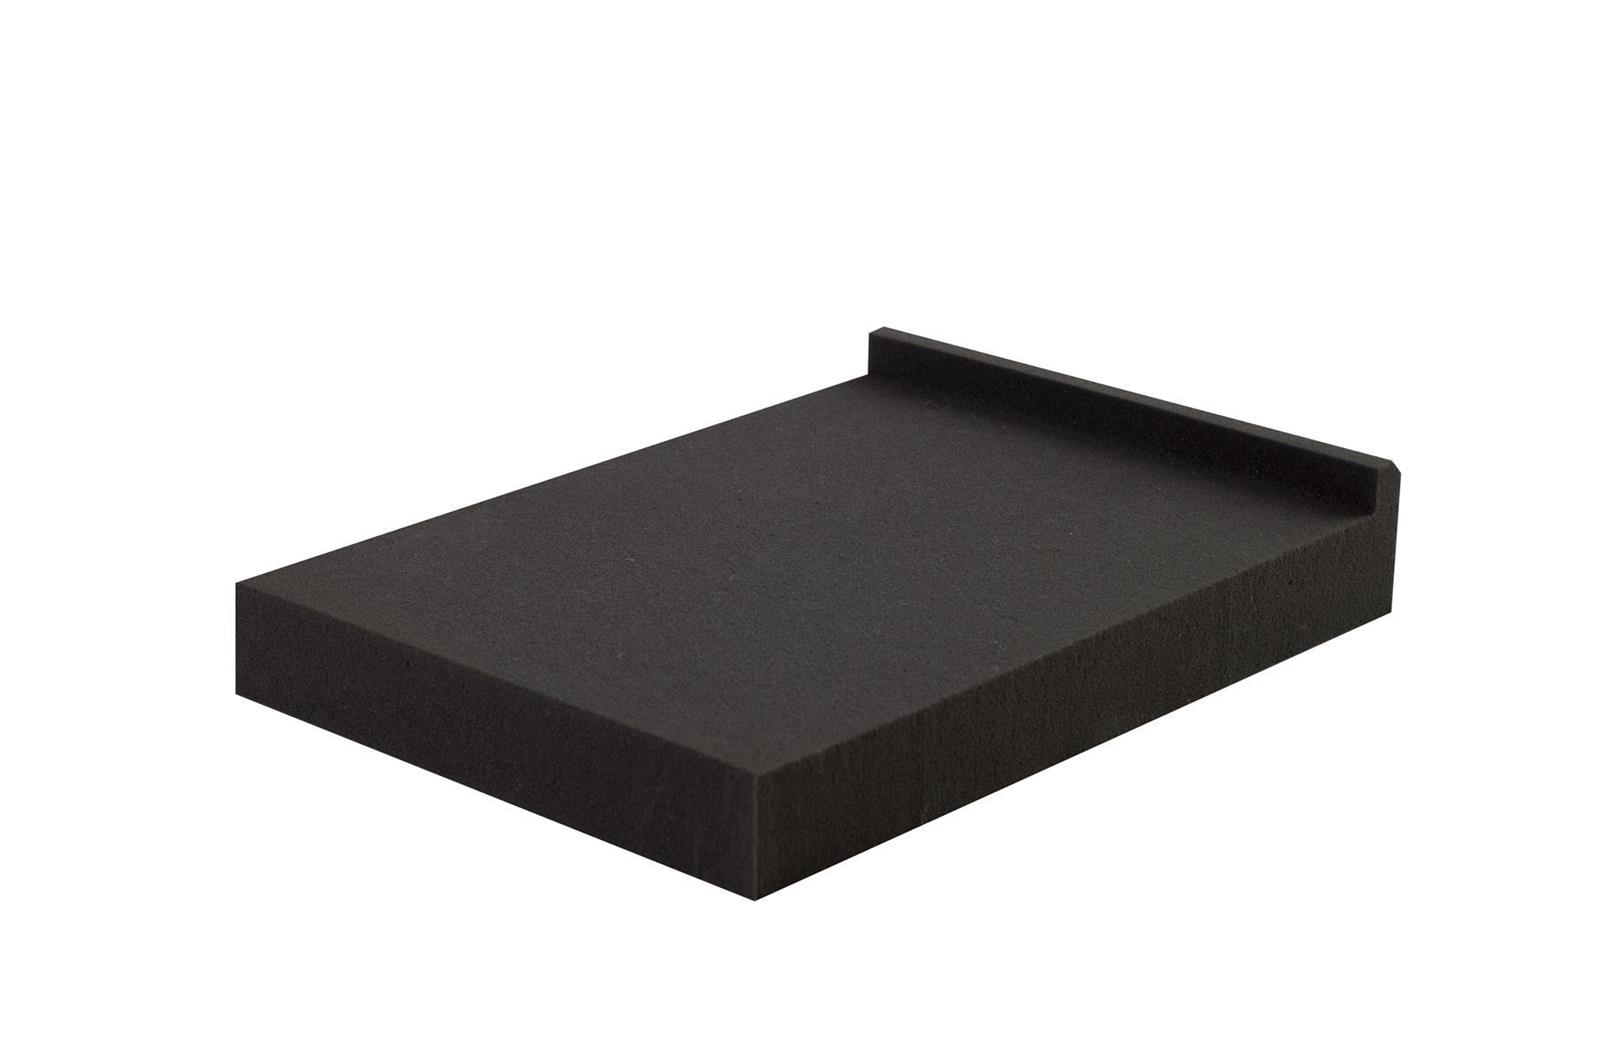 Speaker isolation pad review